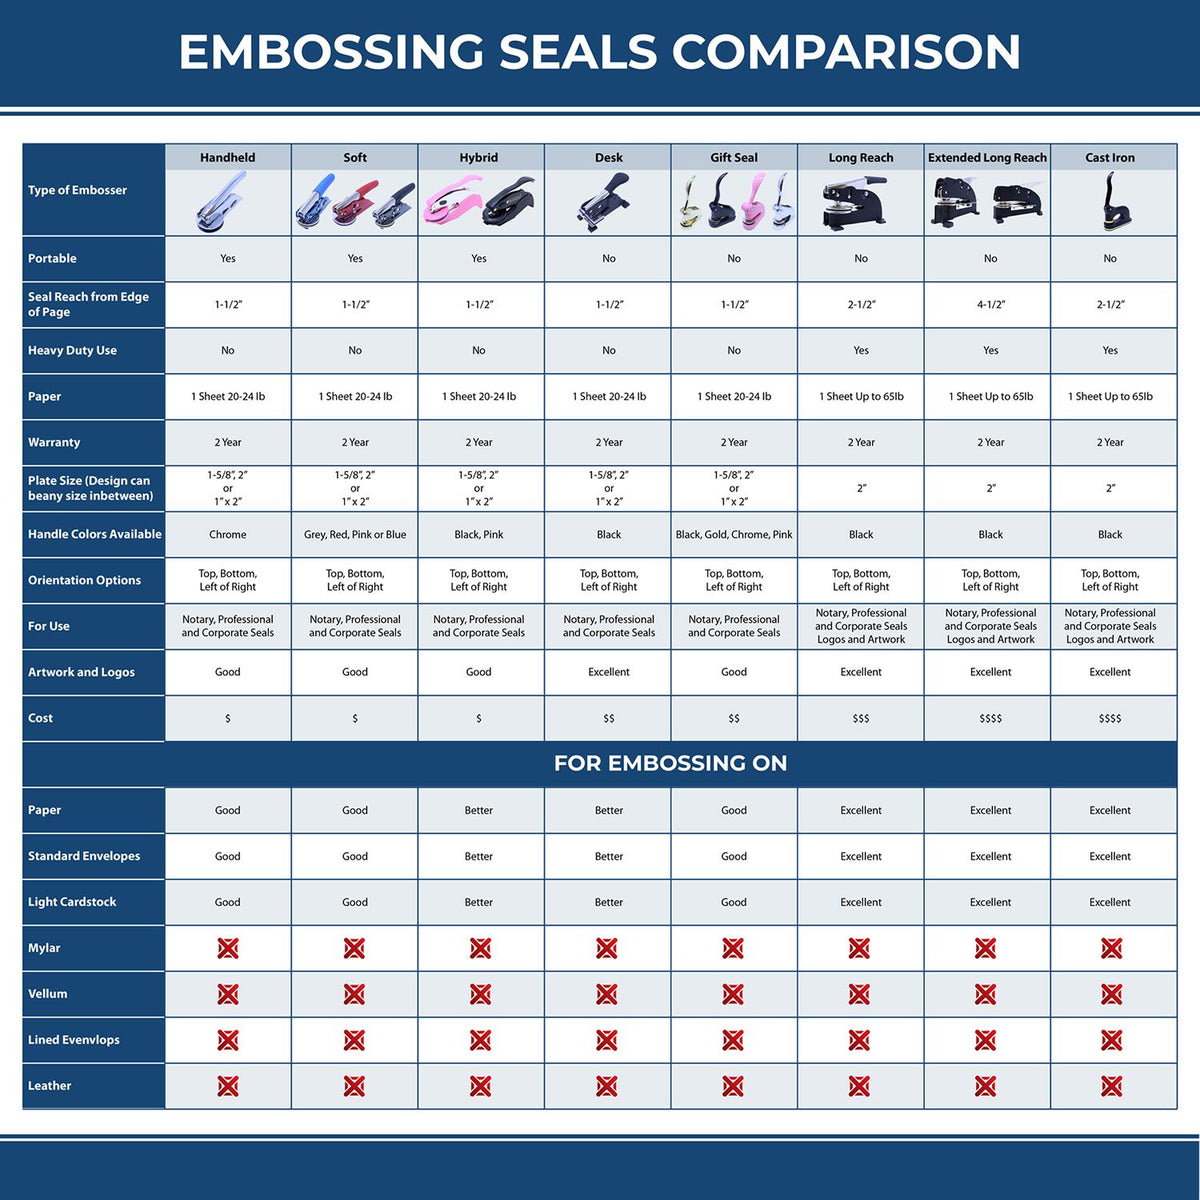 A comparison chart for the different types of mount models available for the State of New York Architectural Seal Embosser.